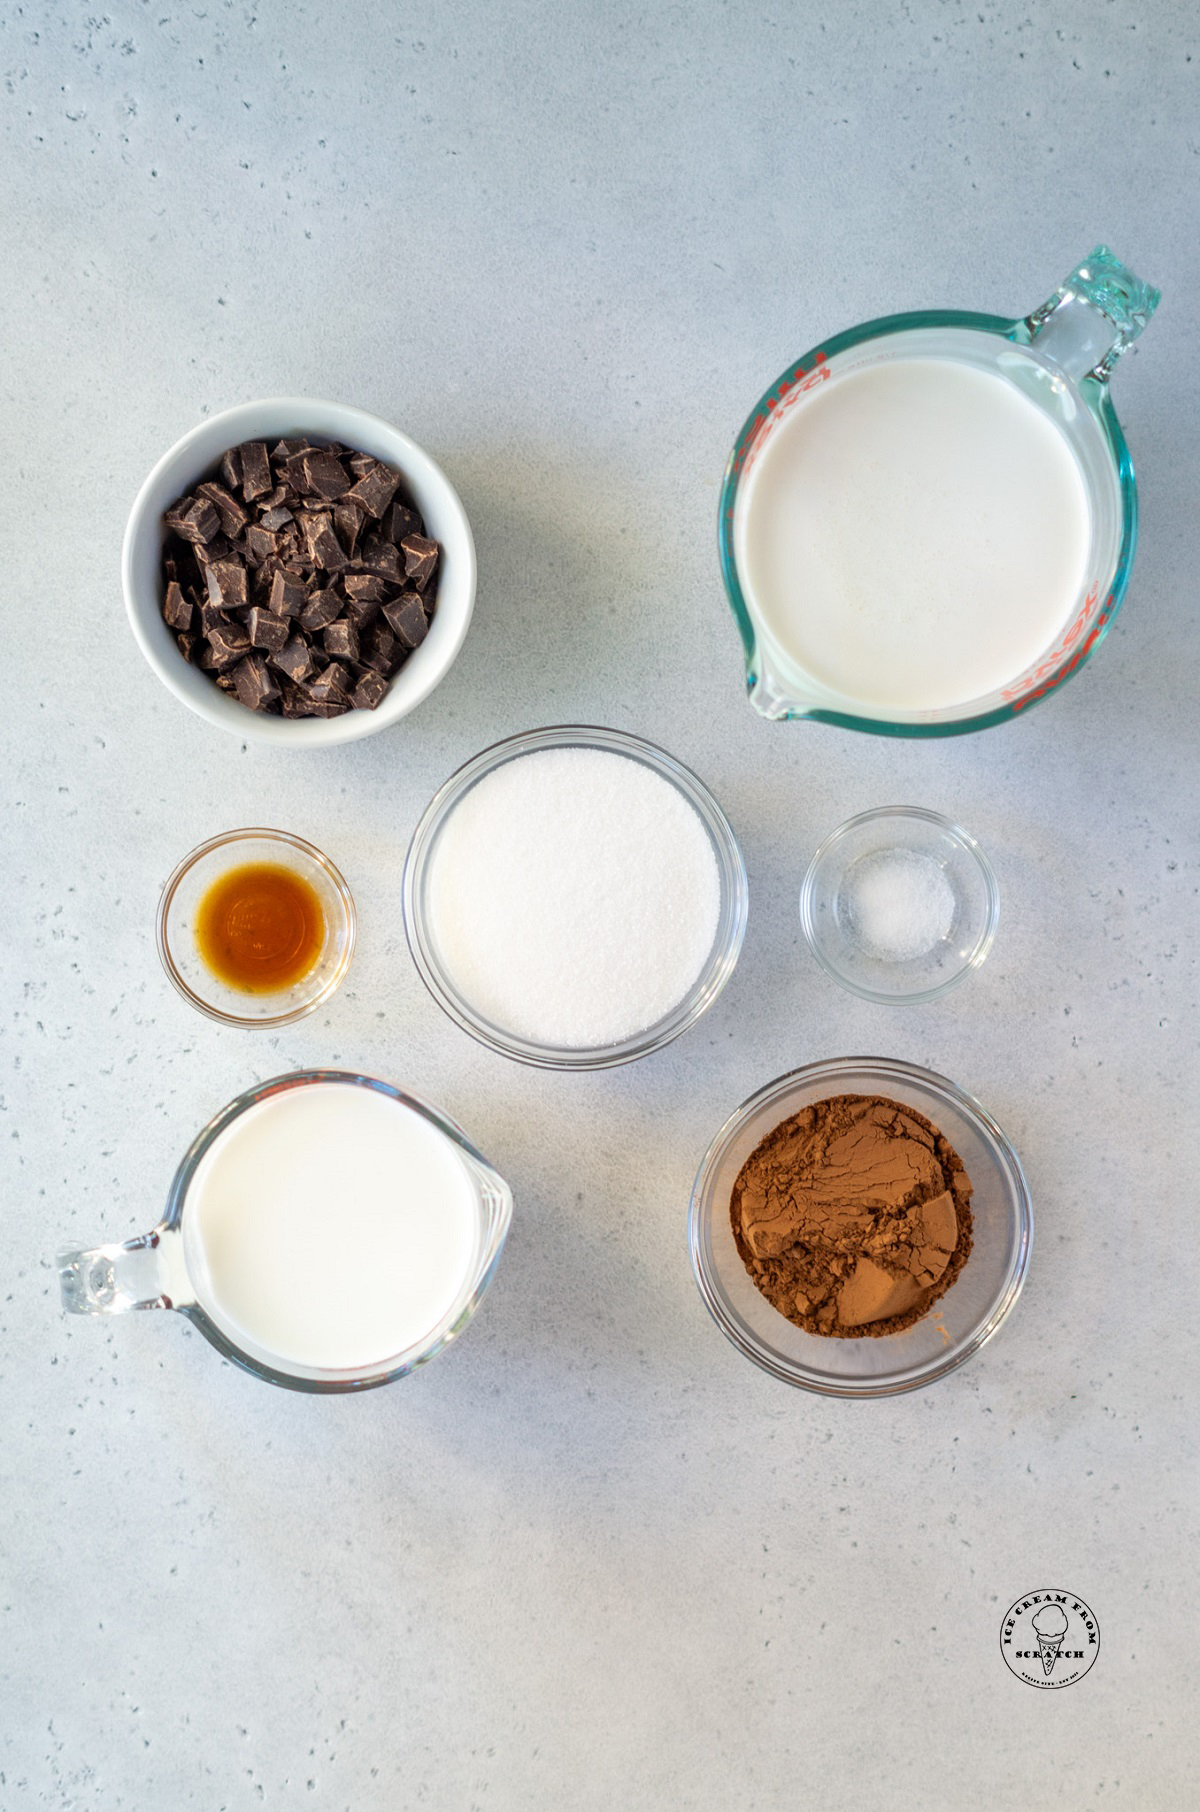 The ingredients in homemade chocolate chocolate chip ice cream.